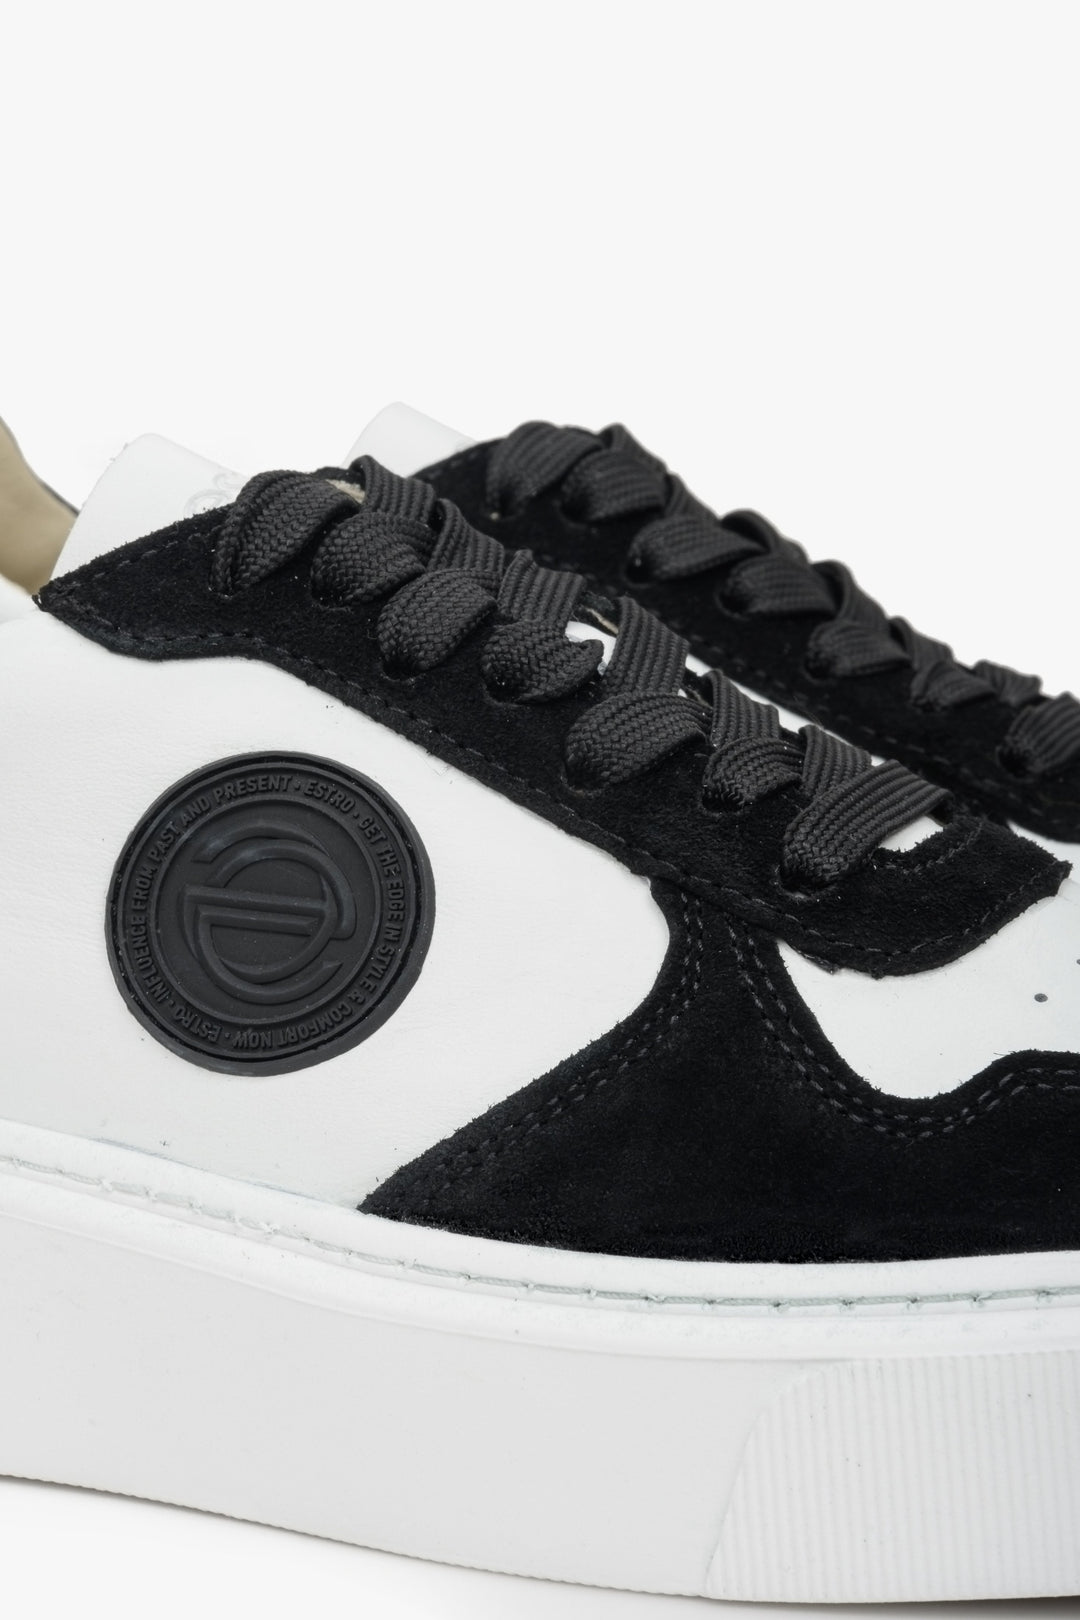 Estro velour and leather sneakers in white and black. Close-up of decorative logo.